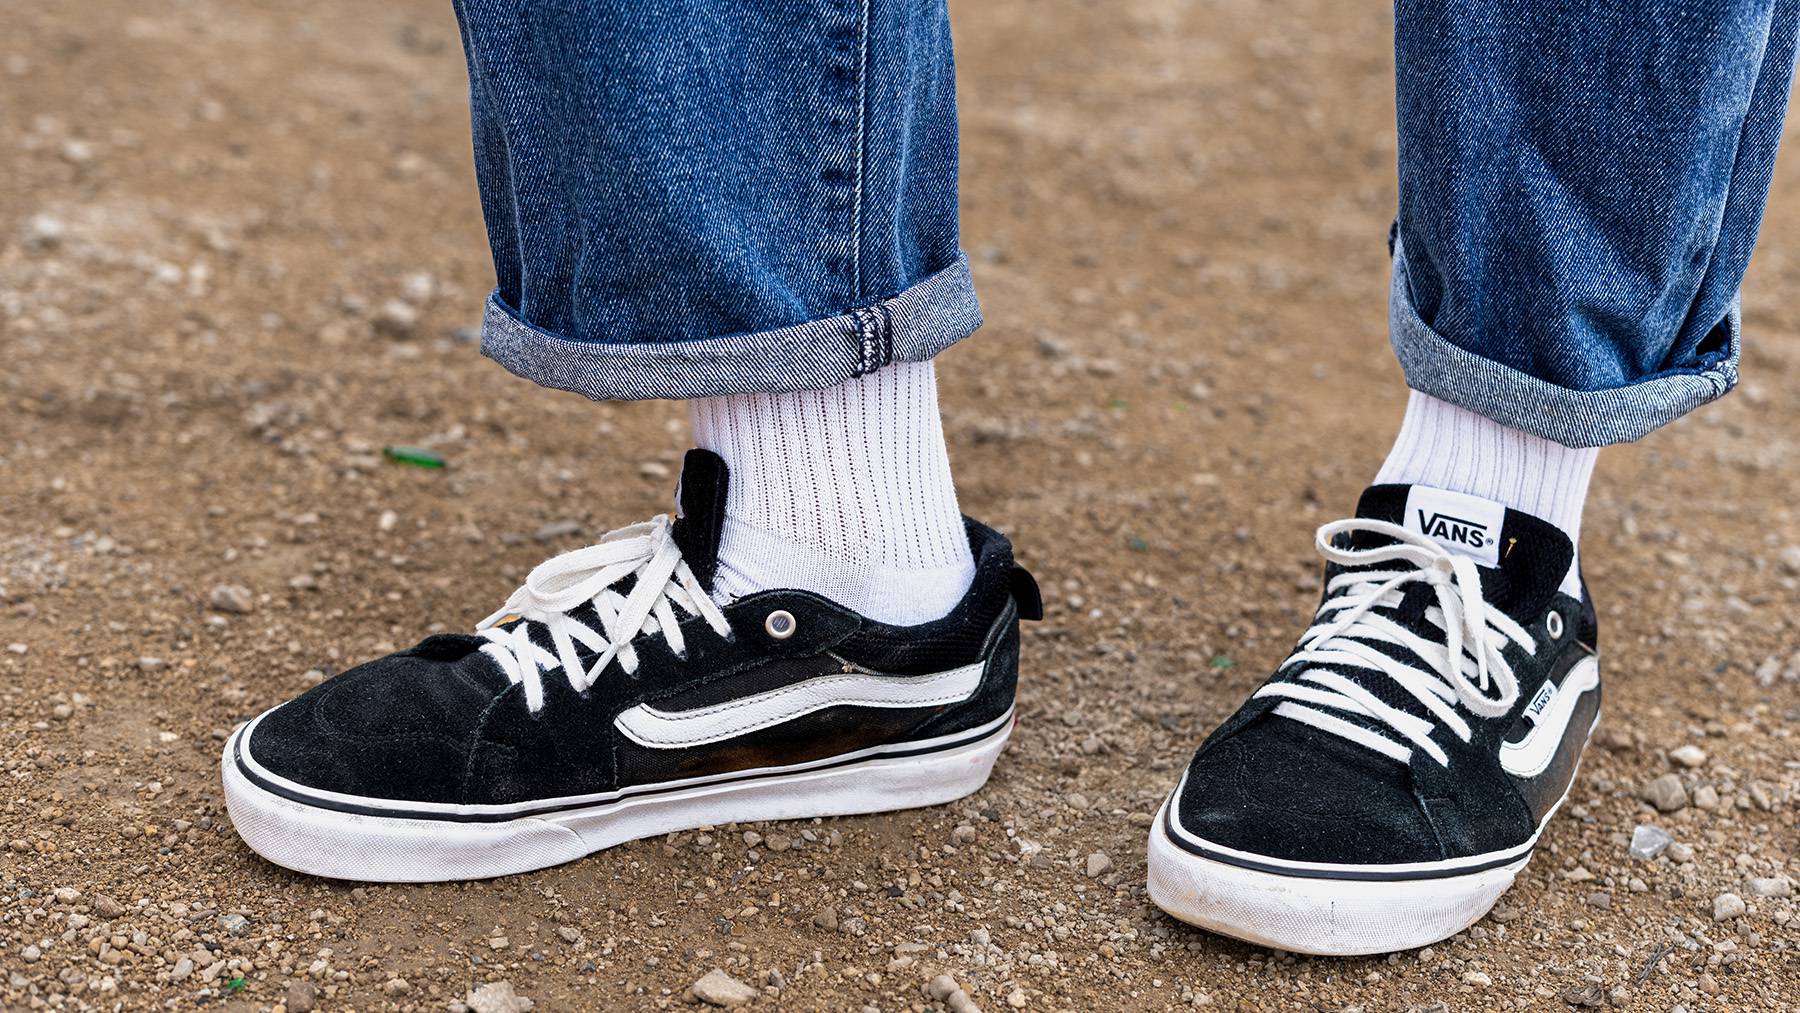 Vans Old Skool shoes with white tube socks and jeans.